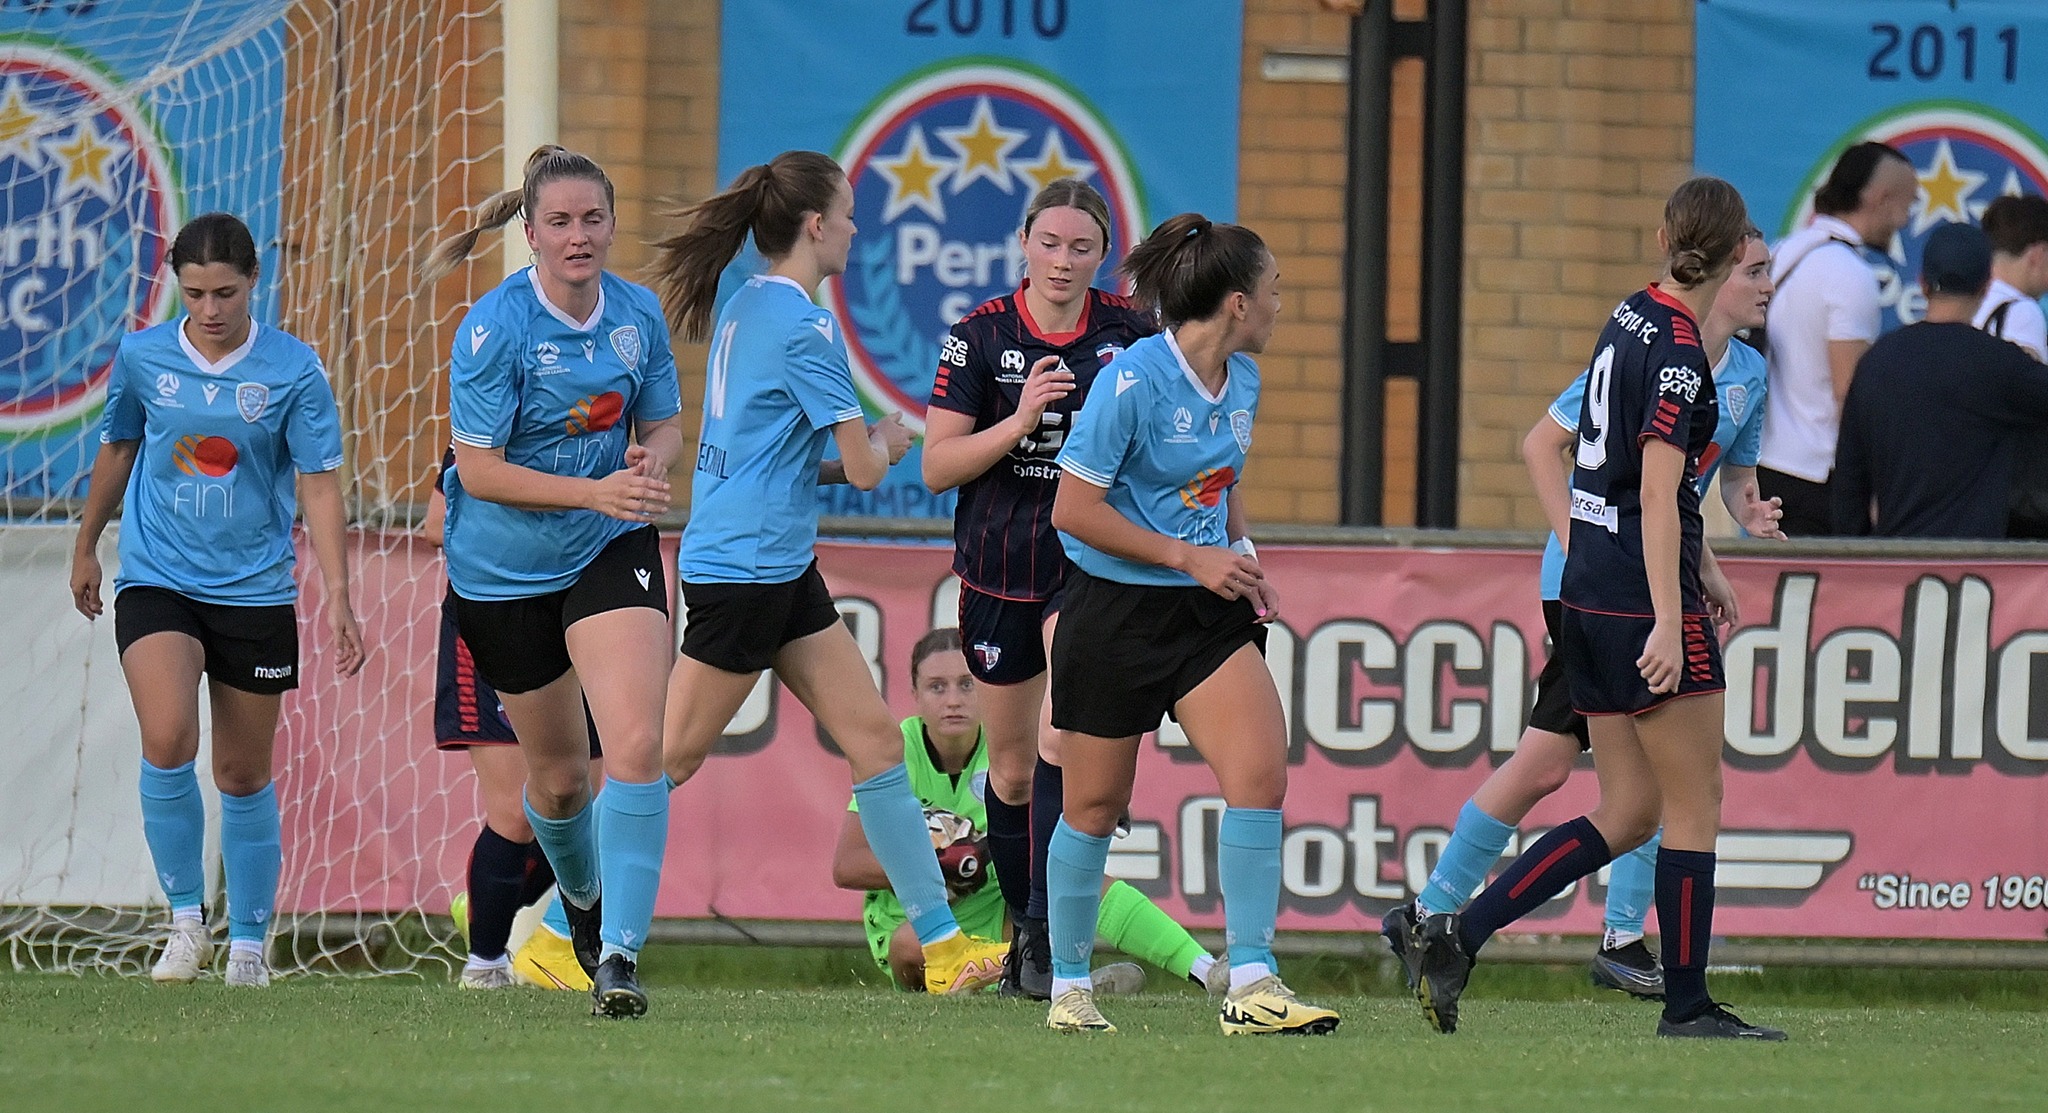 Perth SC's Lily Bailey saves the ball during the Perth SC vs Balcatta Etna game. Image Credit Rob Lizzi